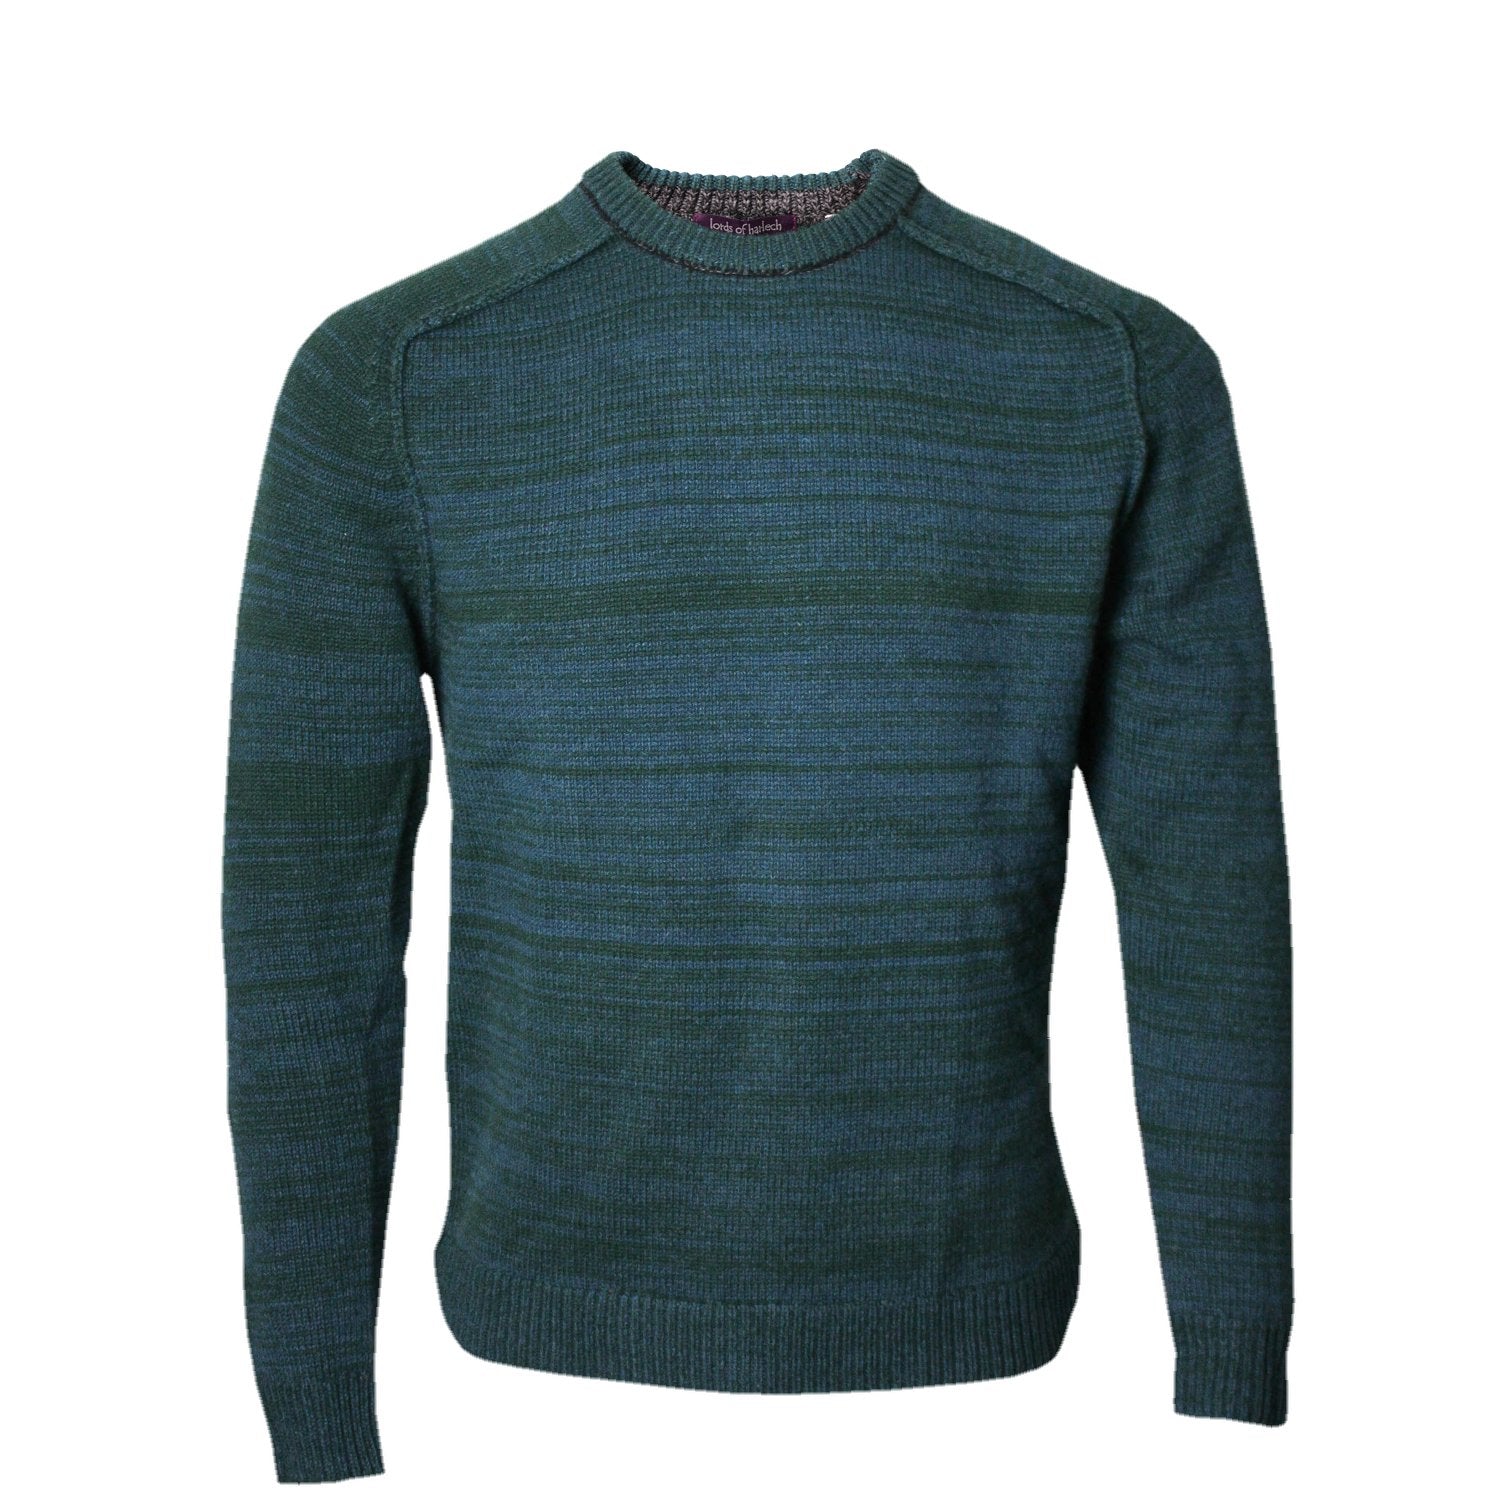 Crosby Crew Neck Sweater in Hunter - Lords Of Harlech